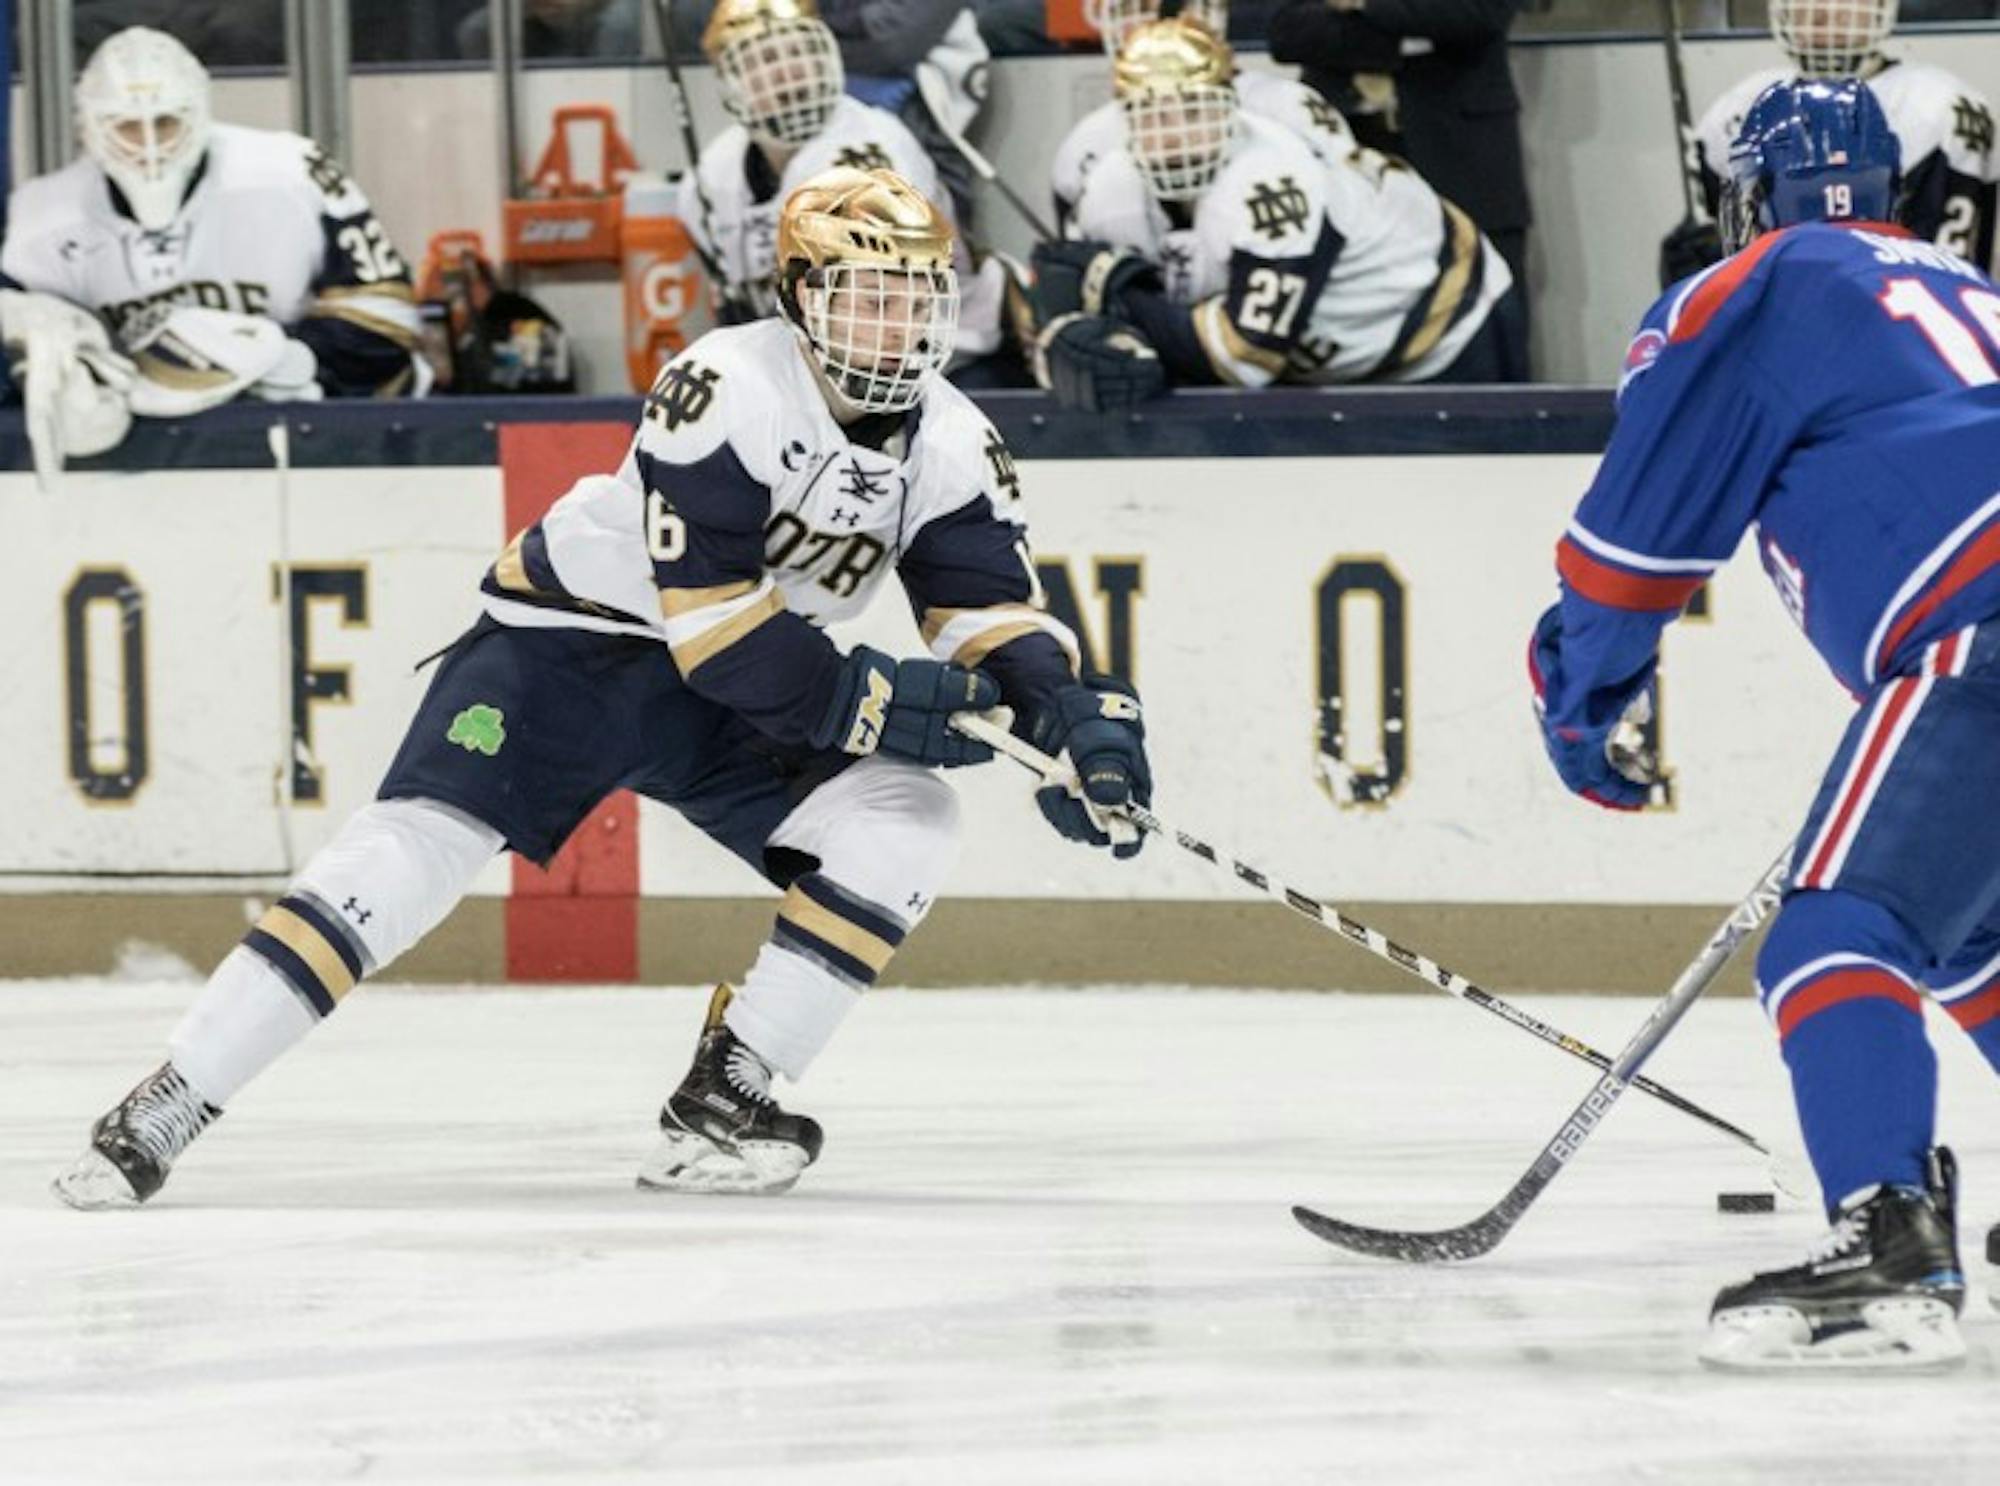 Irish junior forward Connor Hurley hustles up the ice during Notre Dame’s 4-1 loss to UMass-Lowell on Nov. 17.